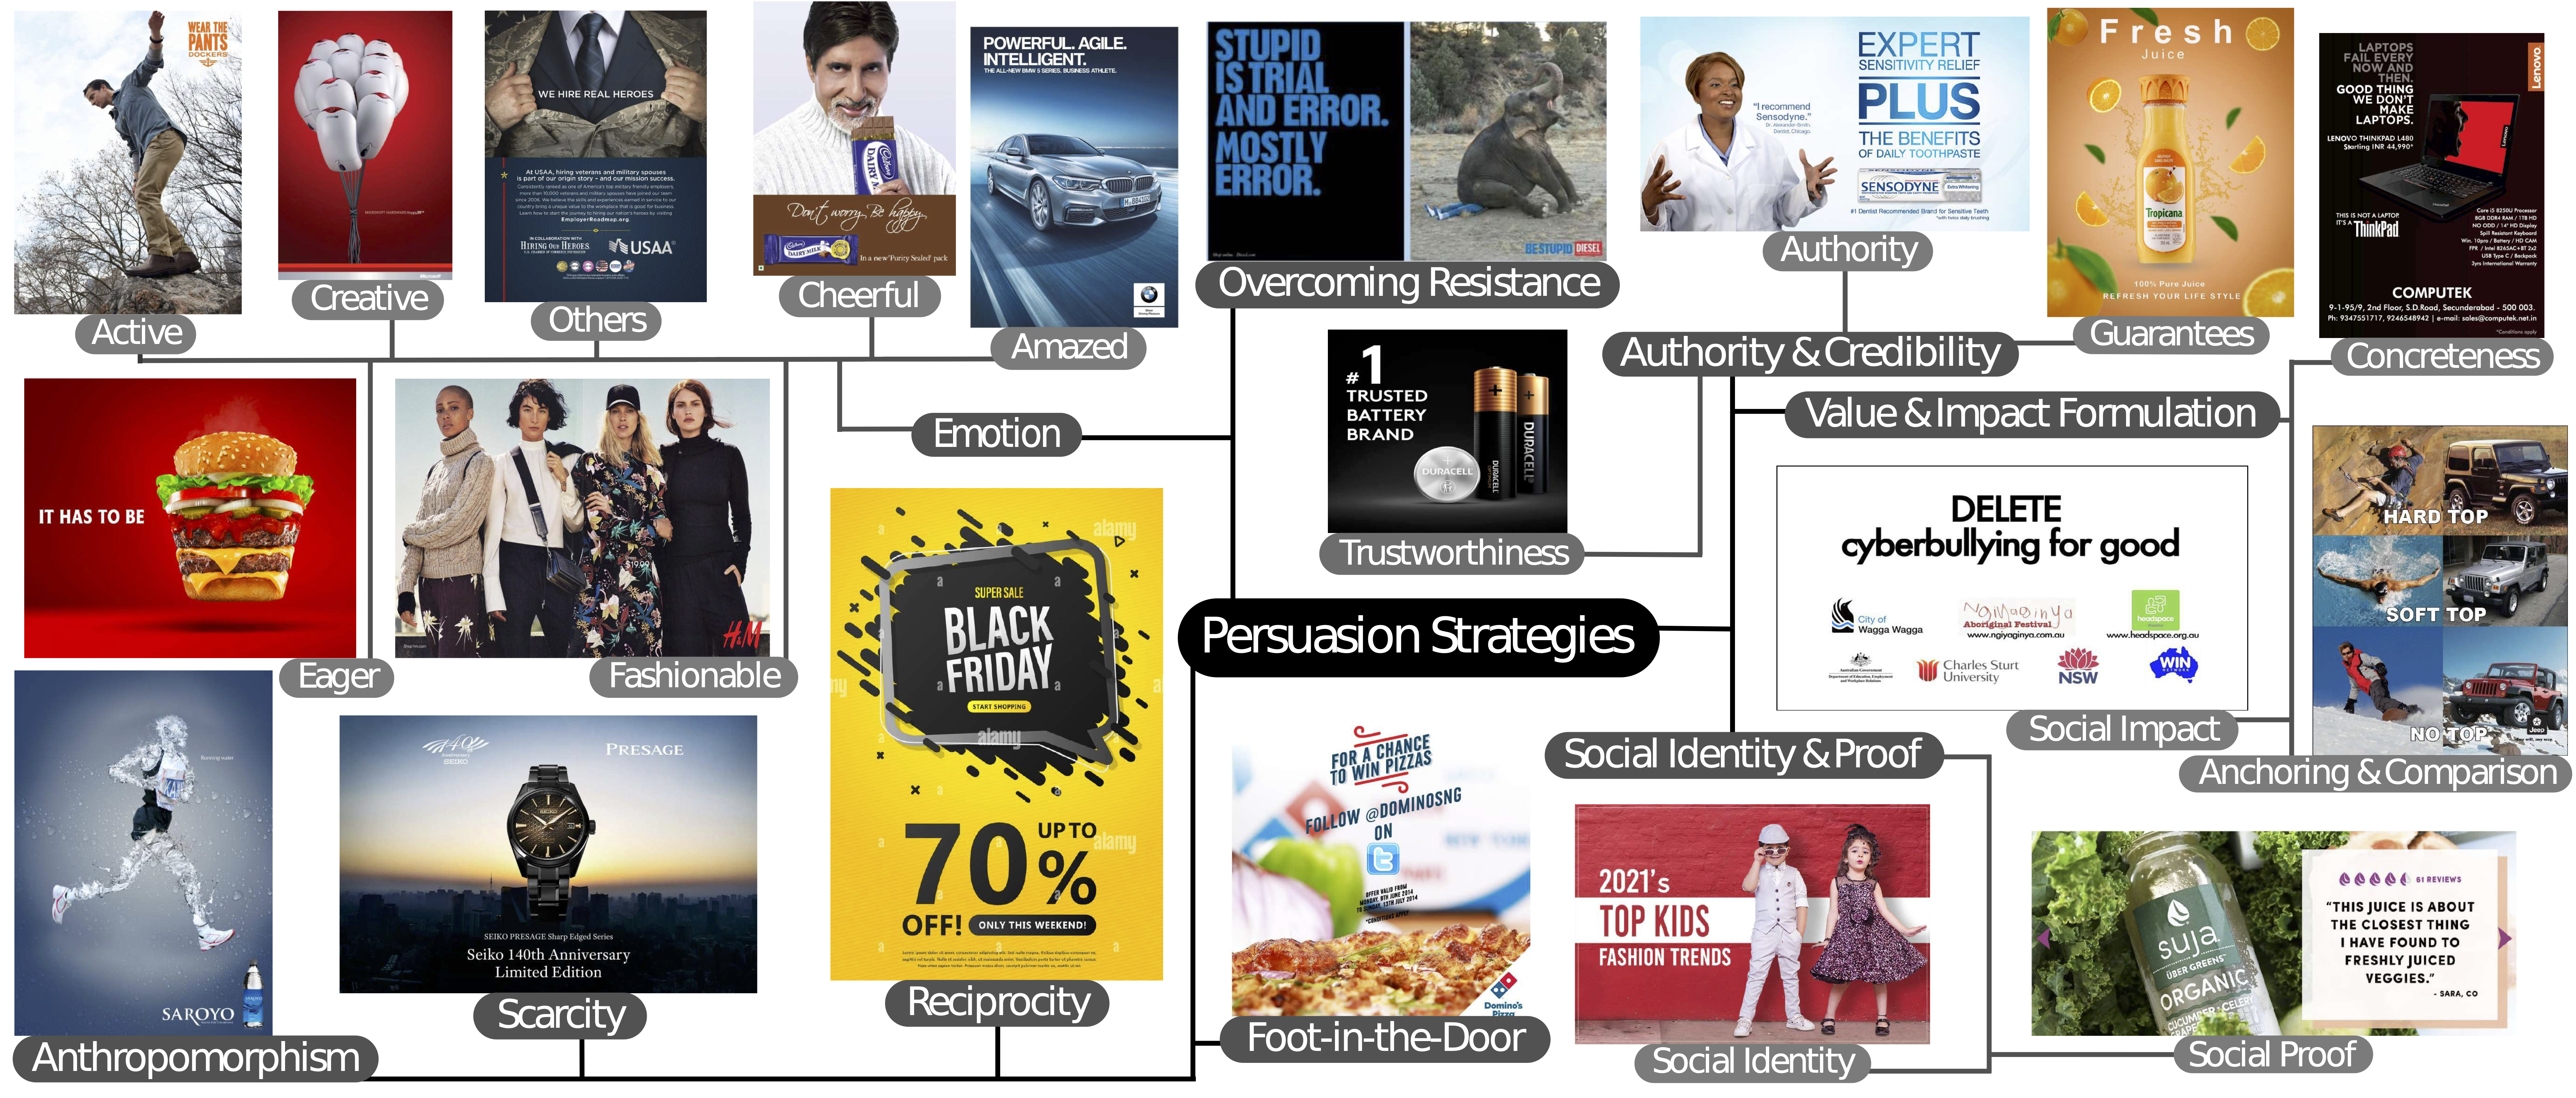 Persuasion strategies in advertisements. Marketers use both text and vision modalities to create ads containing different messaging strategies. Different persuasion strategies are constituted by using various rhetorical devices such as slogans, symbolism, colors, emotions, allusion.